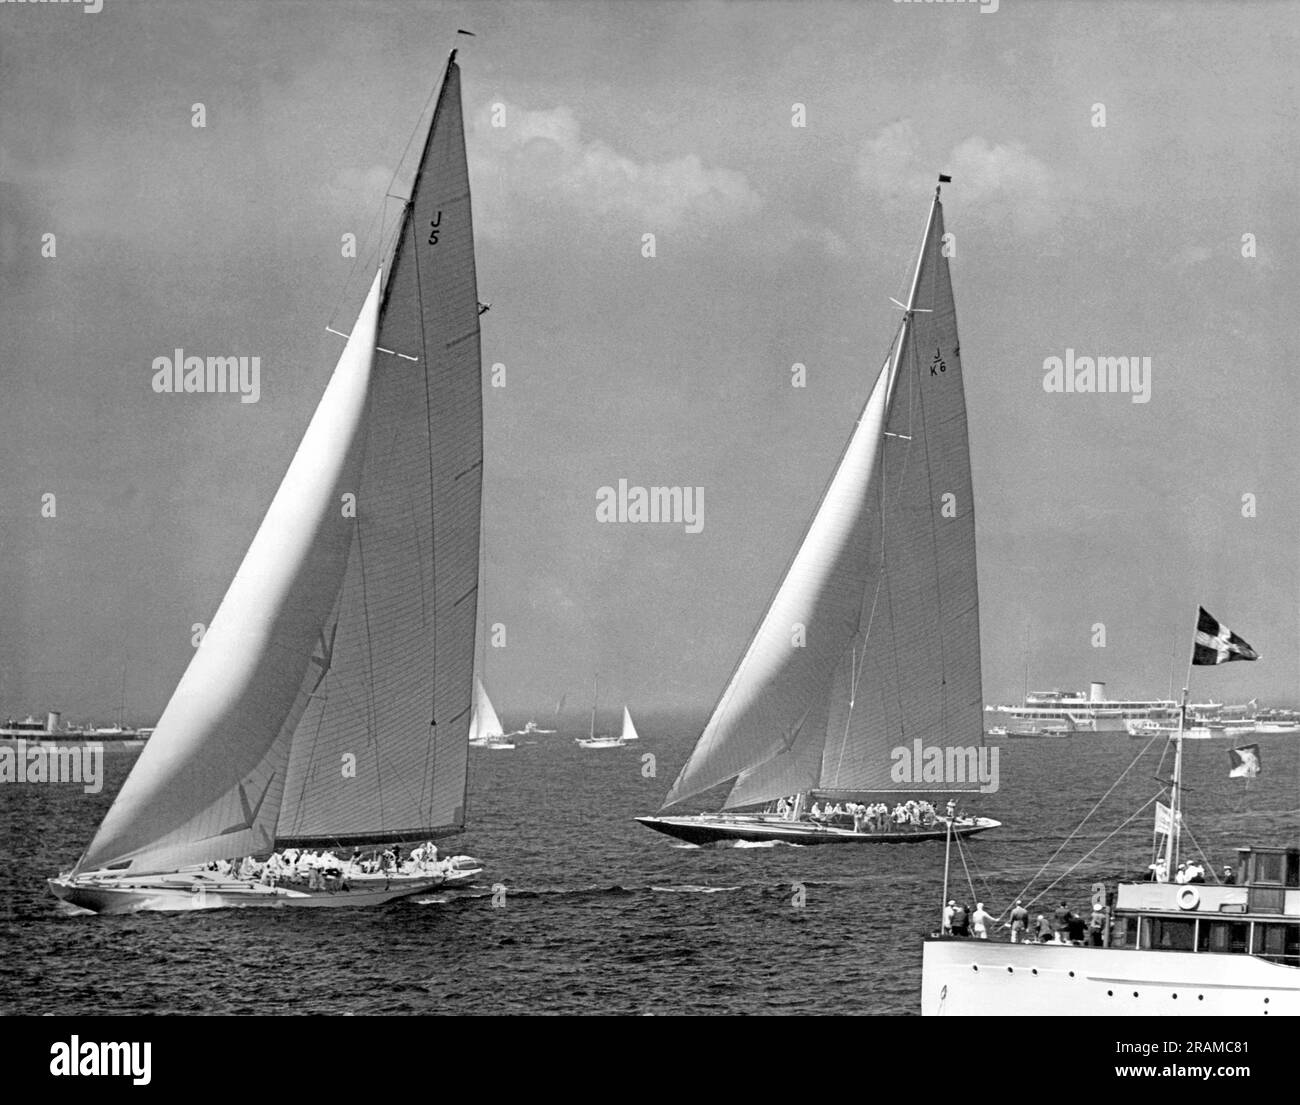 Newport, Rhode Island:  August, 1937. Harold Vanderbilt's America's Cup J sloop entry, 'Ranger', is off to a commanding lead in the third race over T.O.M. Sopwith's 'Endeavour'. Stock Photo